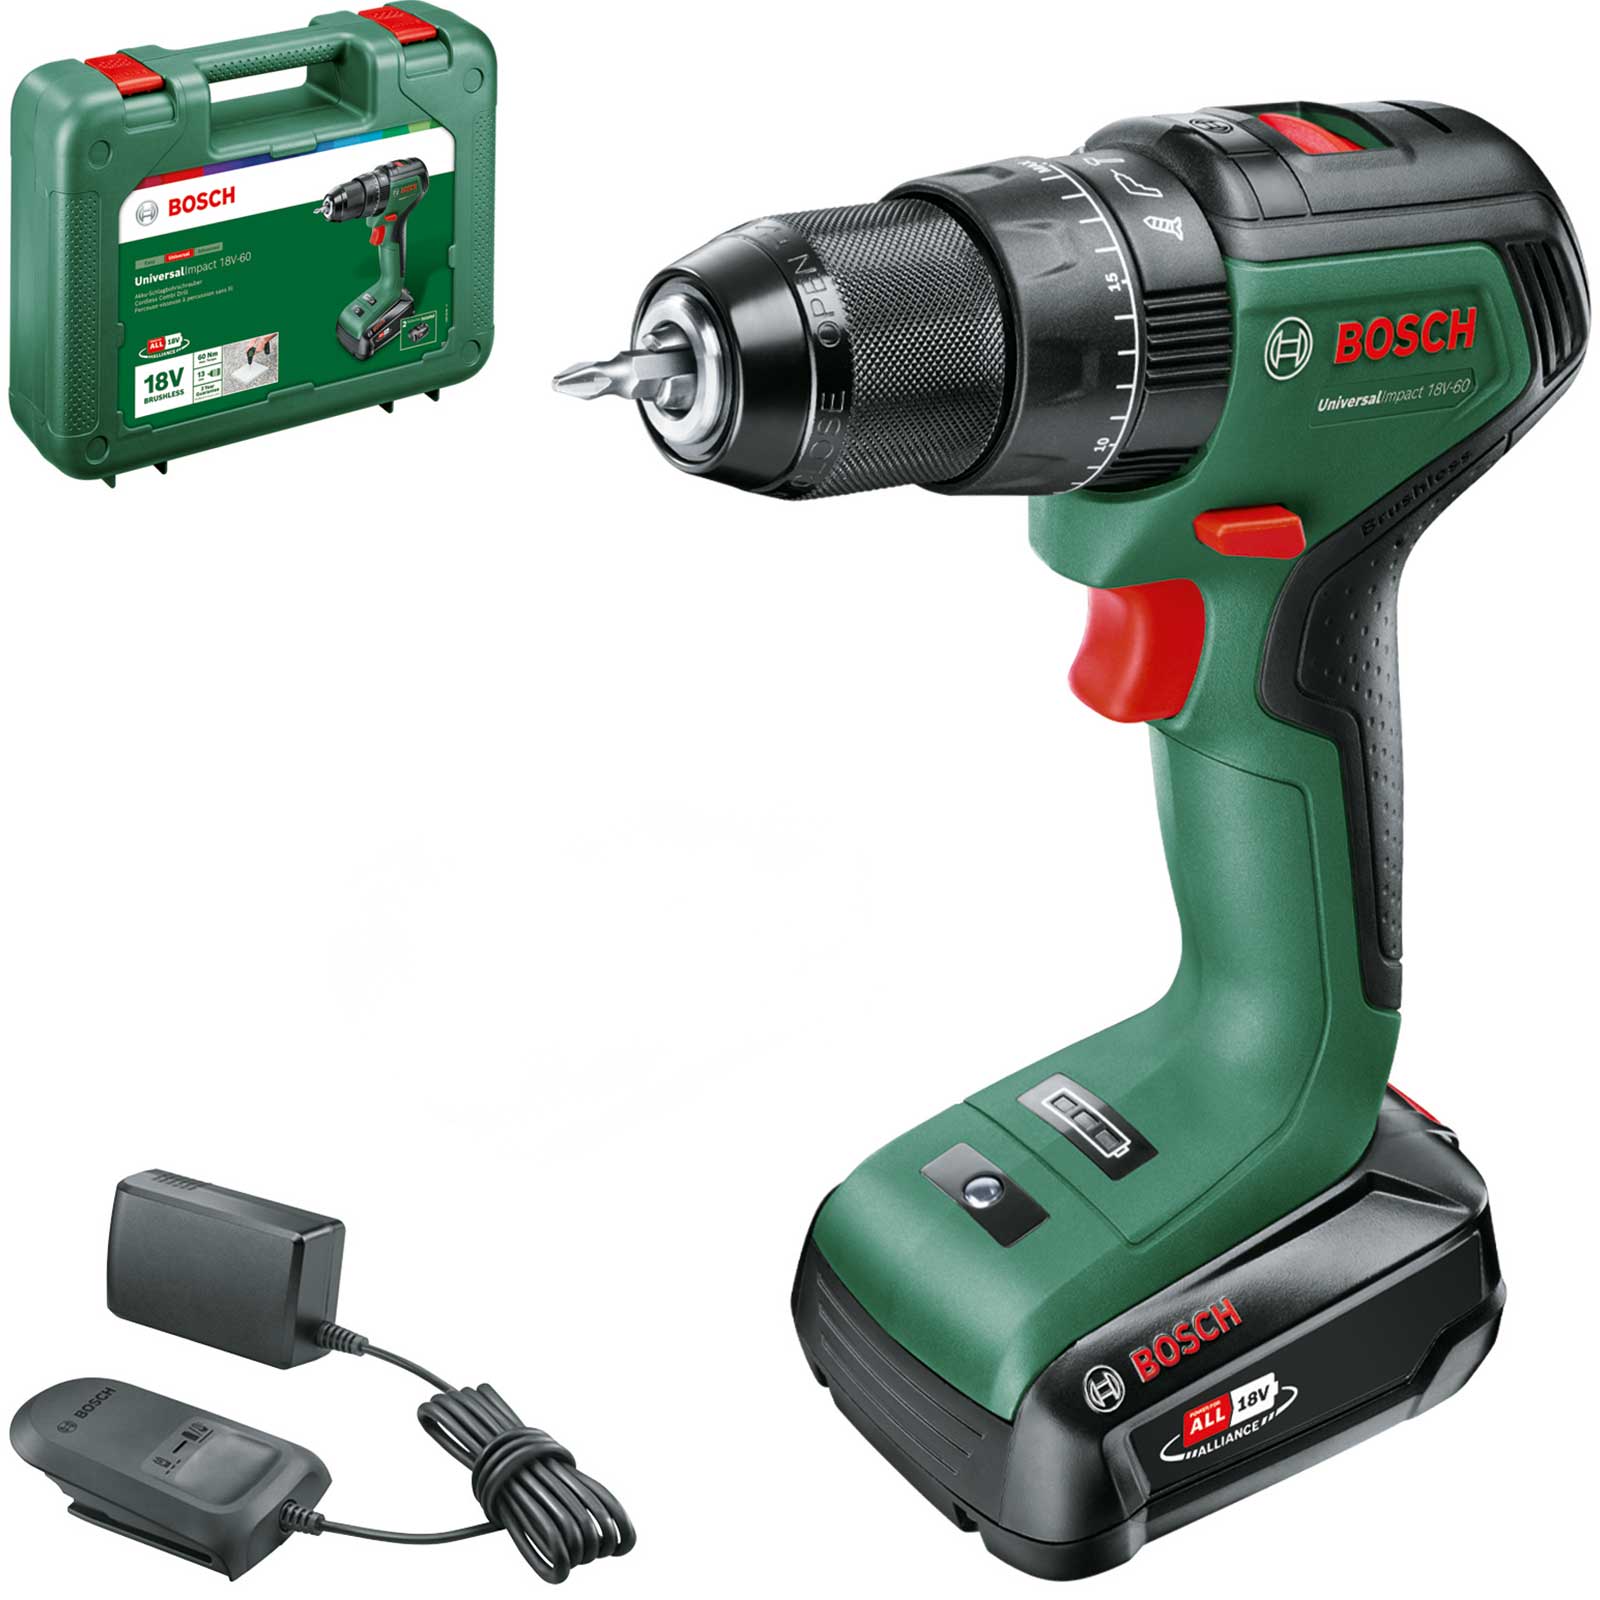 Image of Bosch UNIVERSALIMPACT 18V-60 18v Cordless Brushless Combi Drill 1 x 2ah Li-ion Charger Case